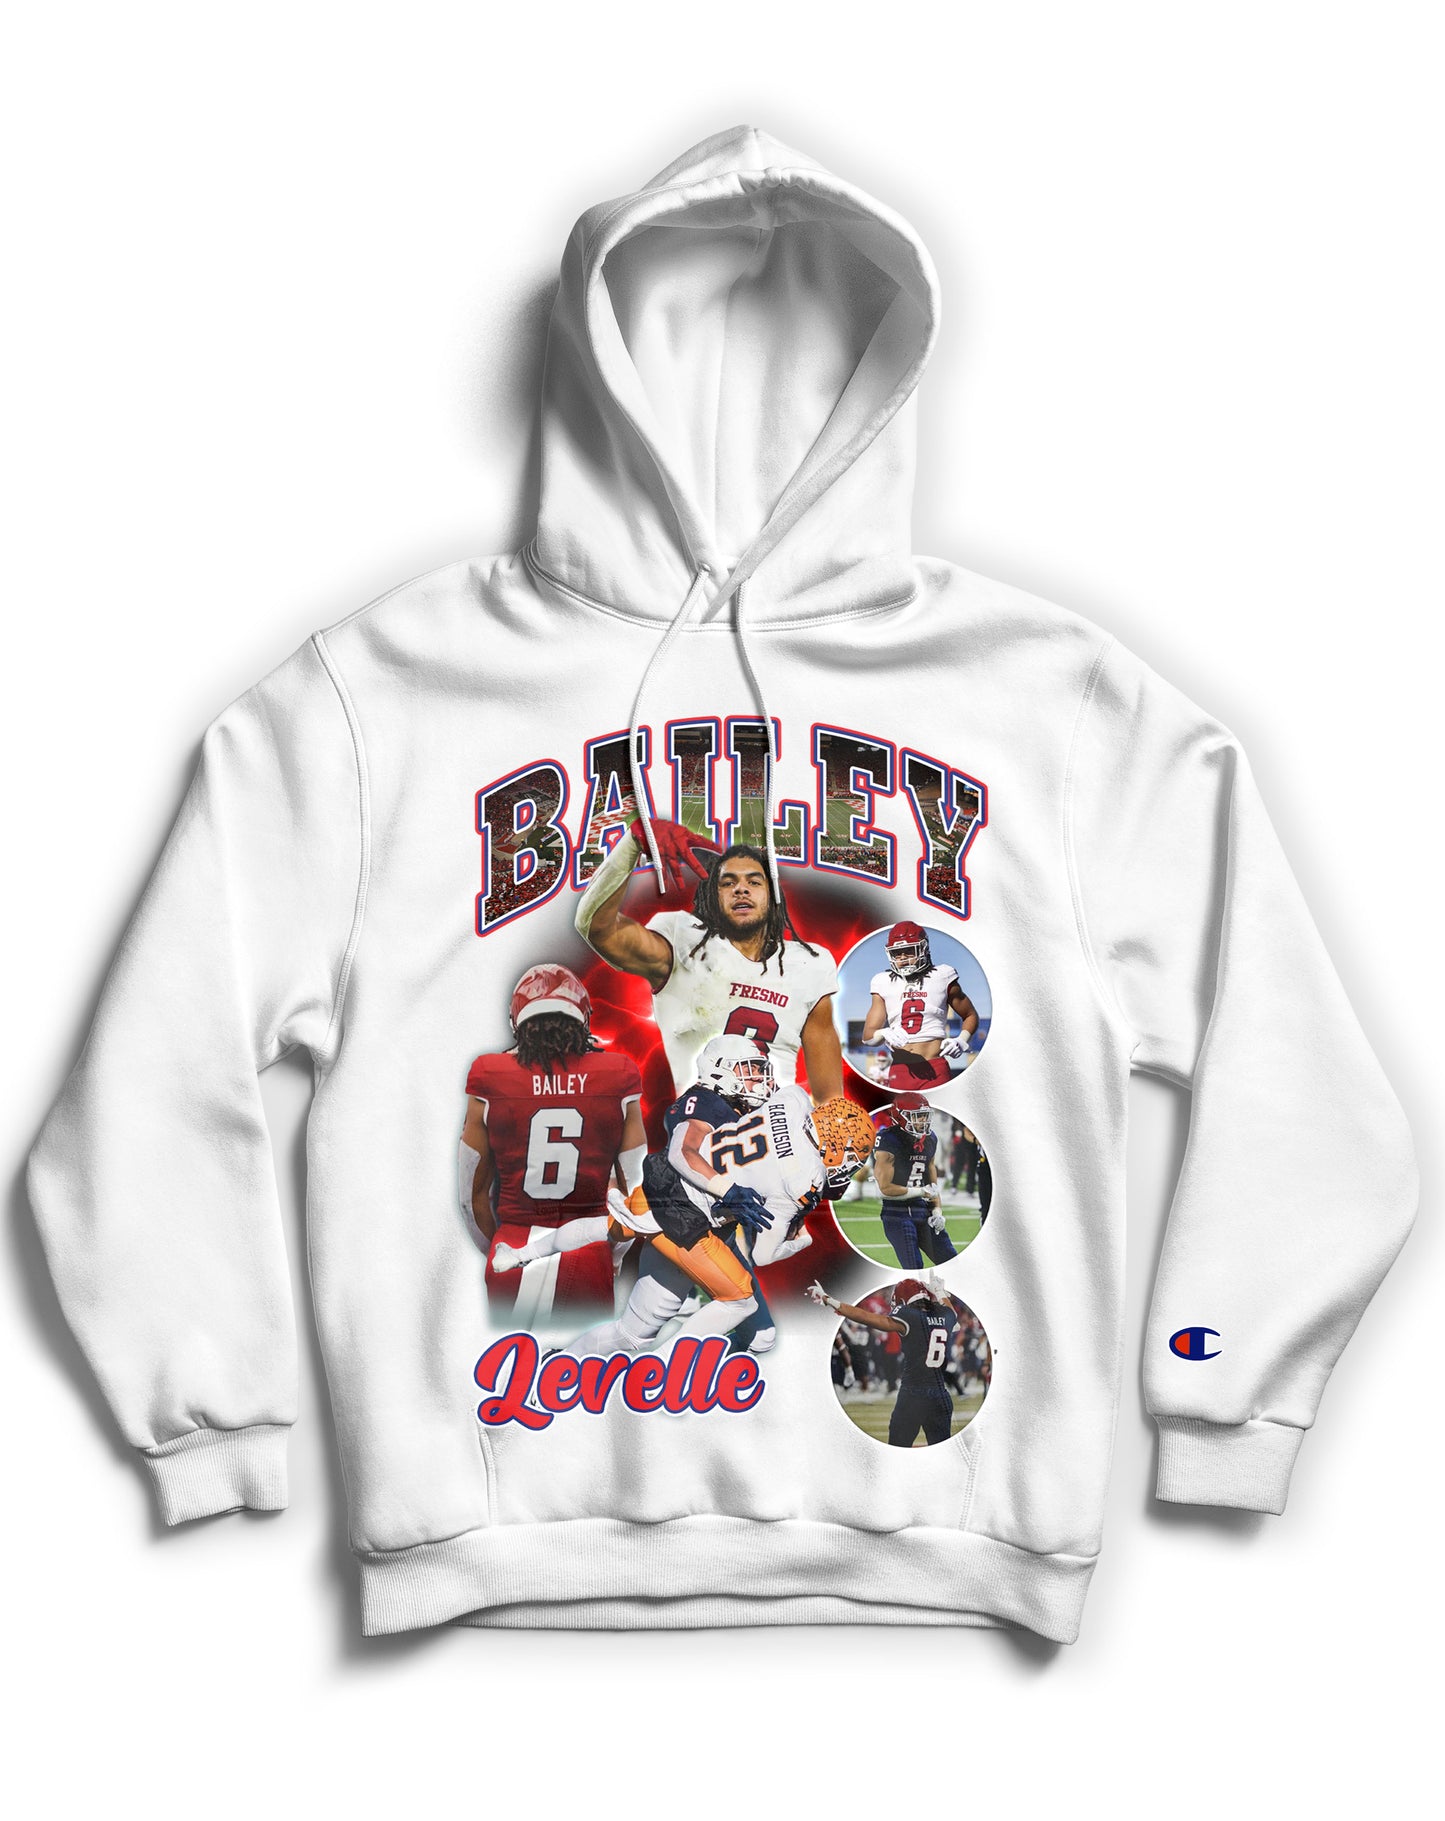 Levelle Bailey "DROP 1" Tribute Hoodie *LIMITED EDITION* (Black & White)